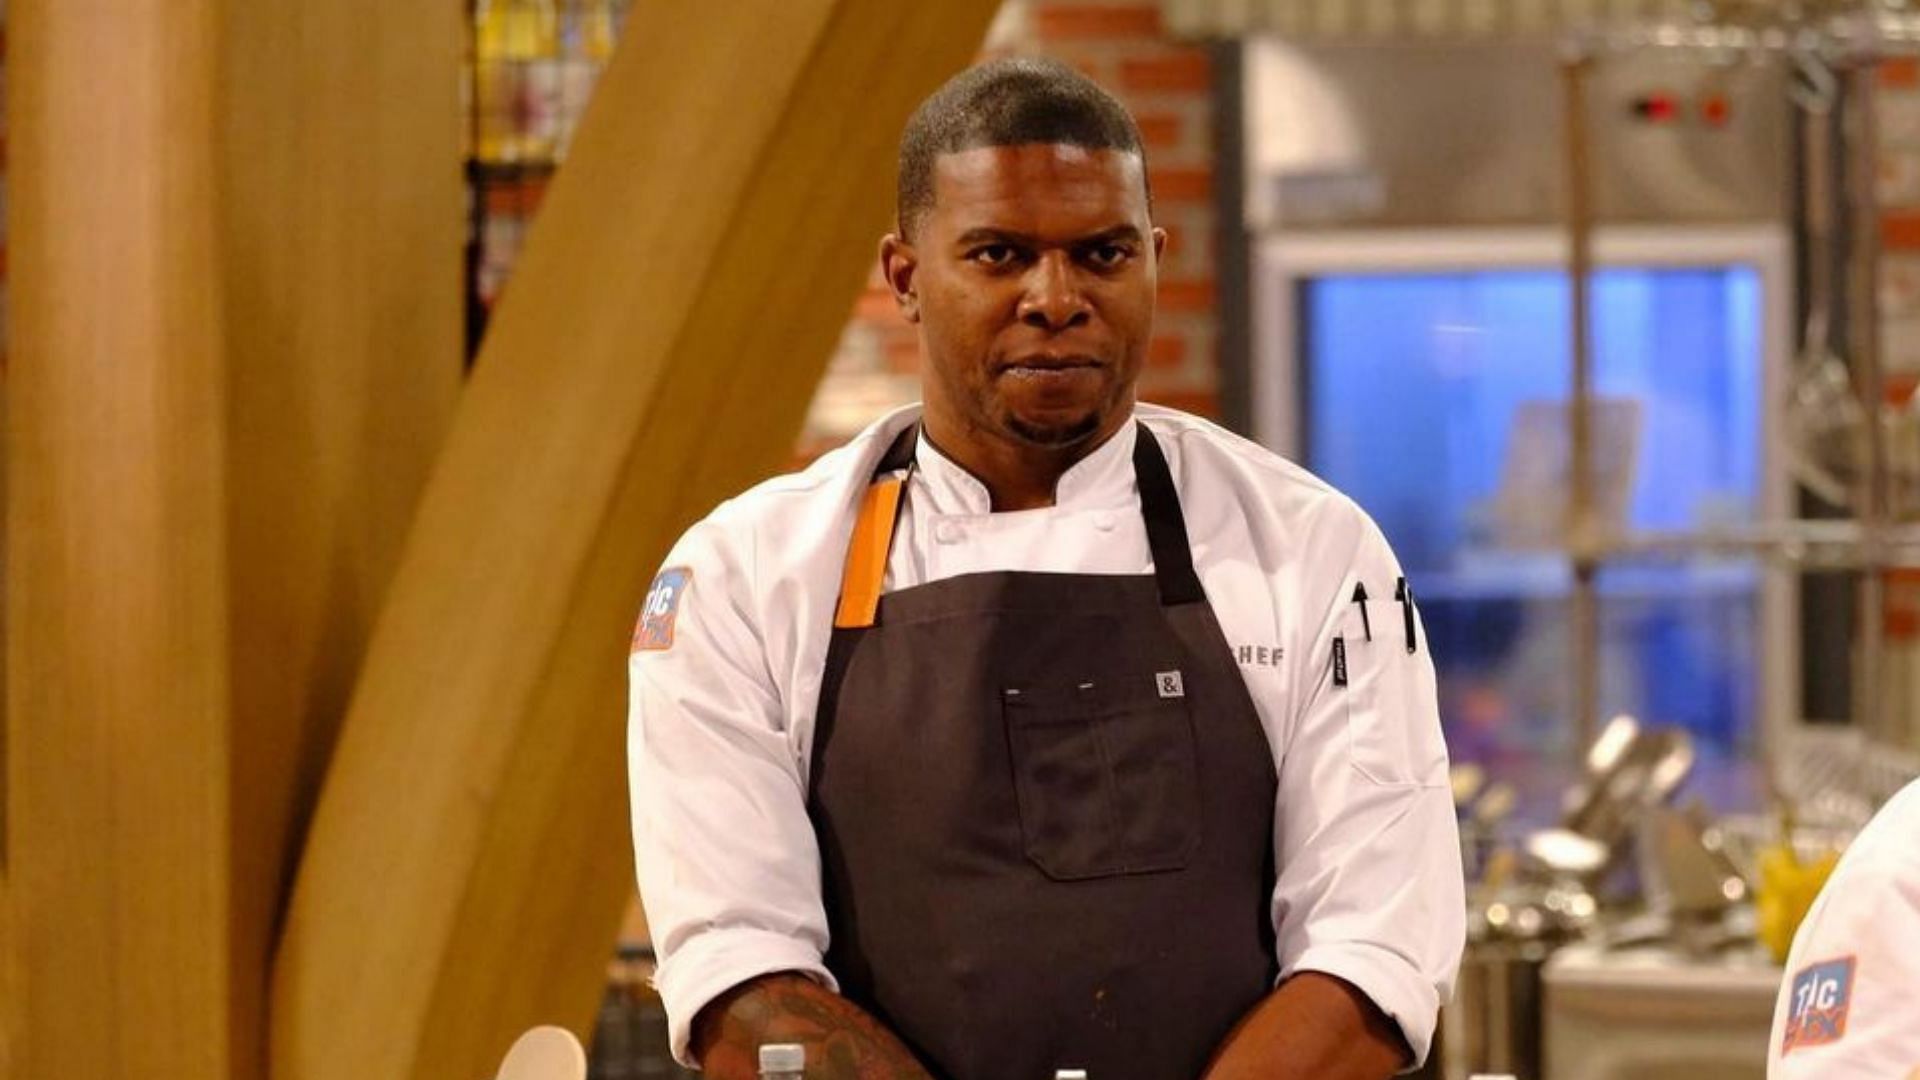 Nick Wallace wins Quickfire Challenge on Top Chef (Image via nickwallaceculinary/Instagram)